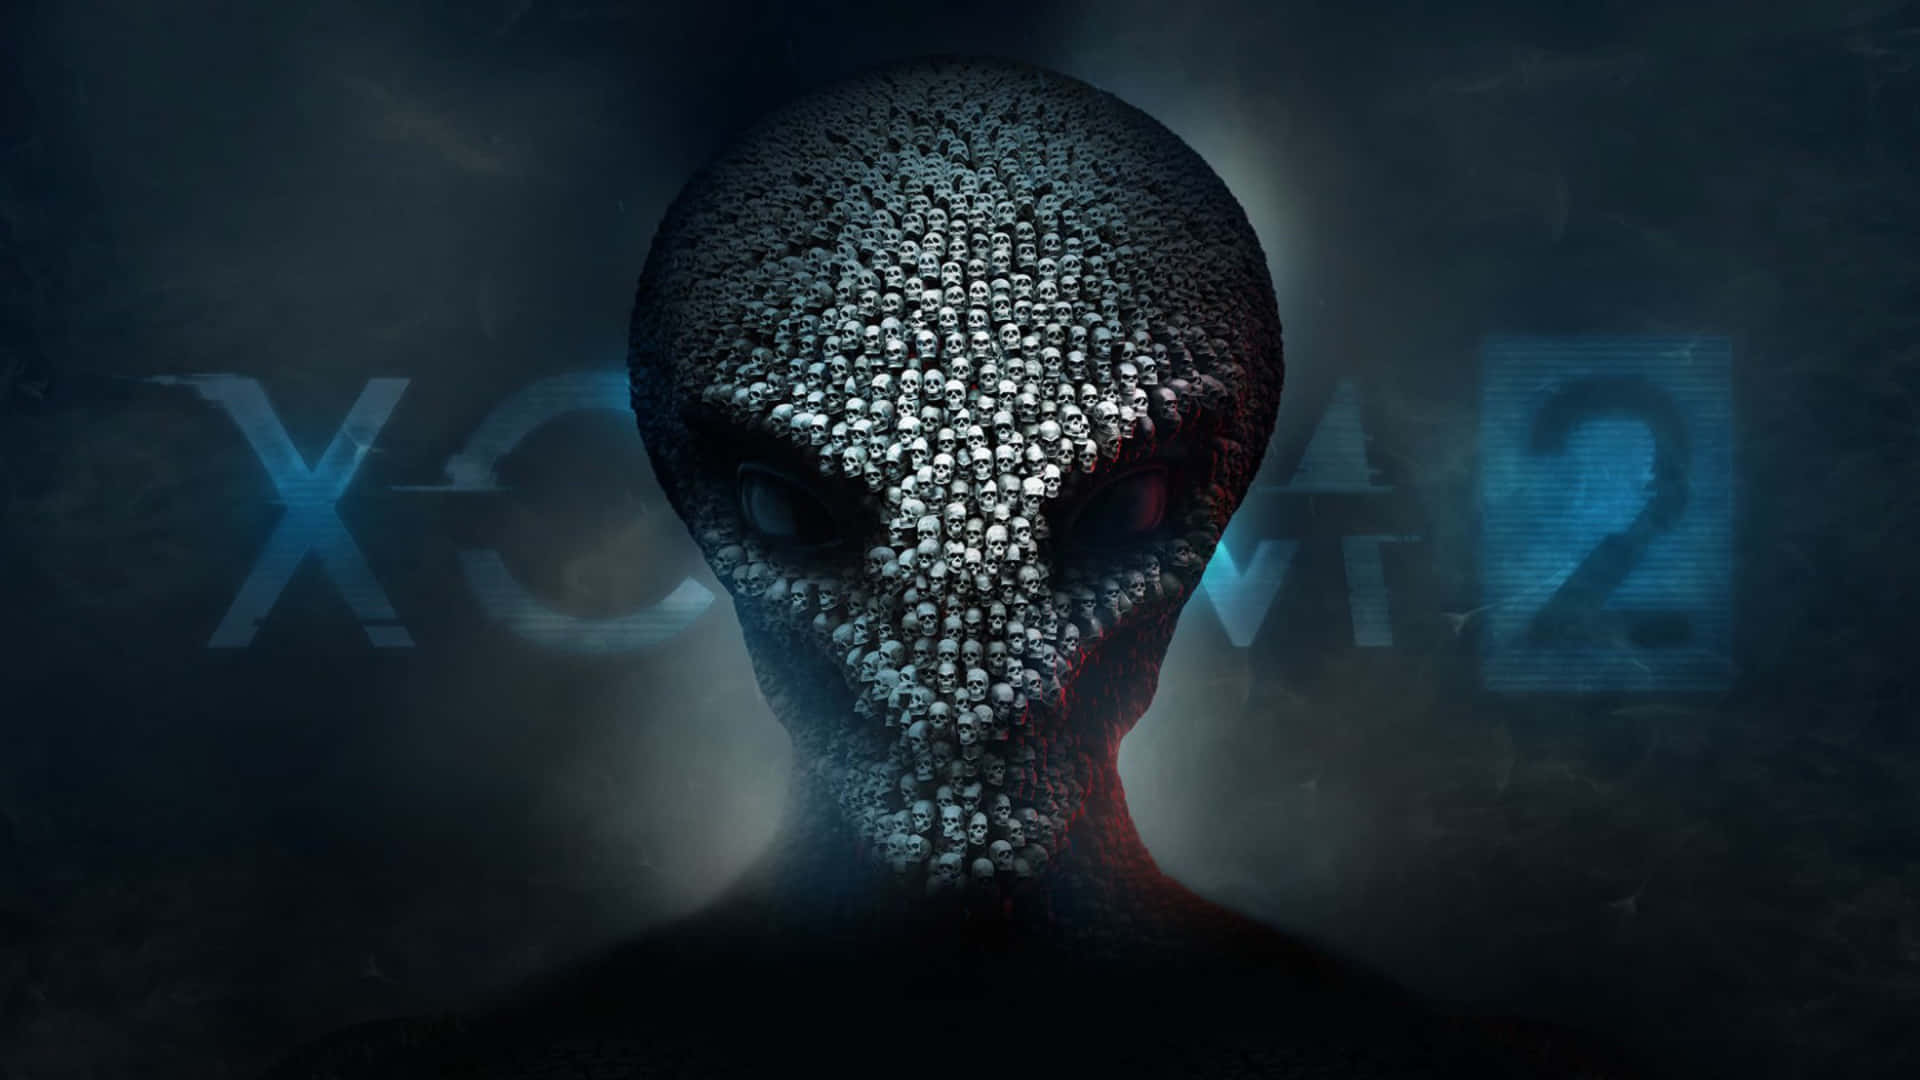 The mysterious unknown of outer space comes alive in the Alien 4K artwork. Wallpaper